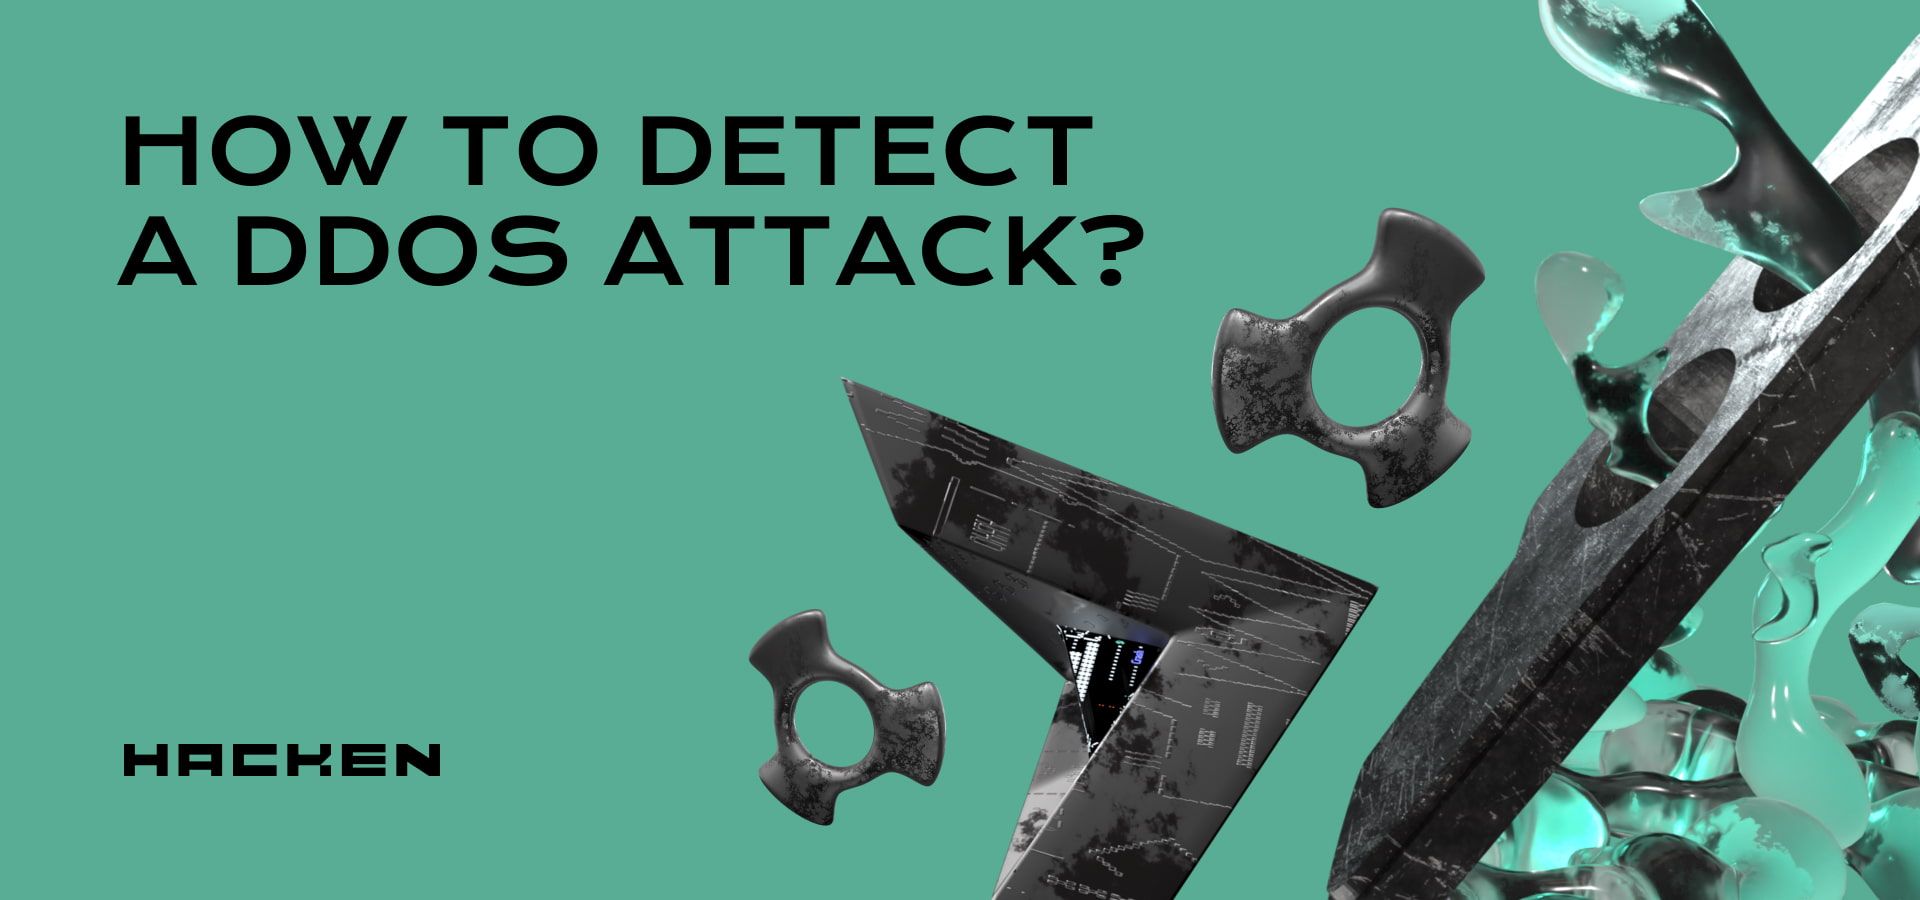 How to Detect a DDoS Attack?